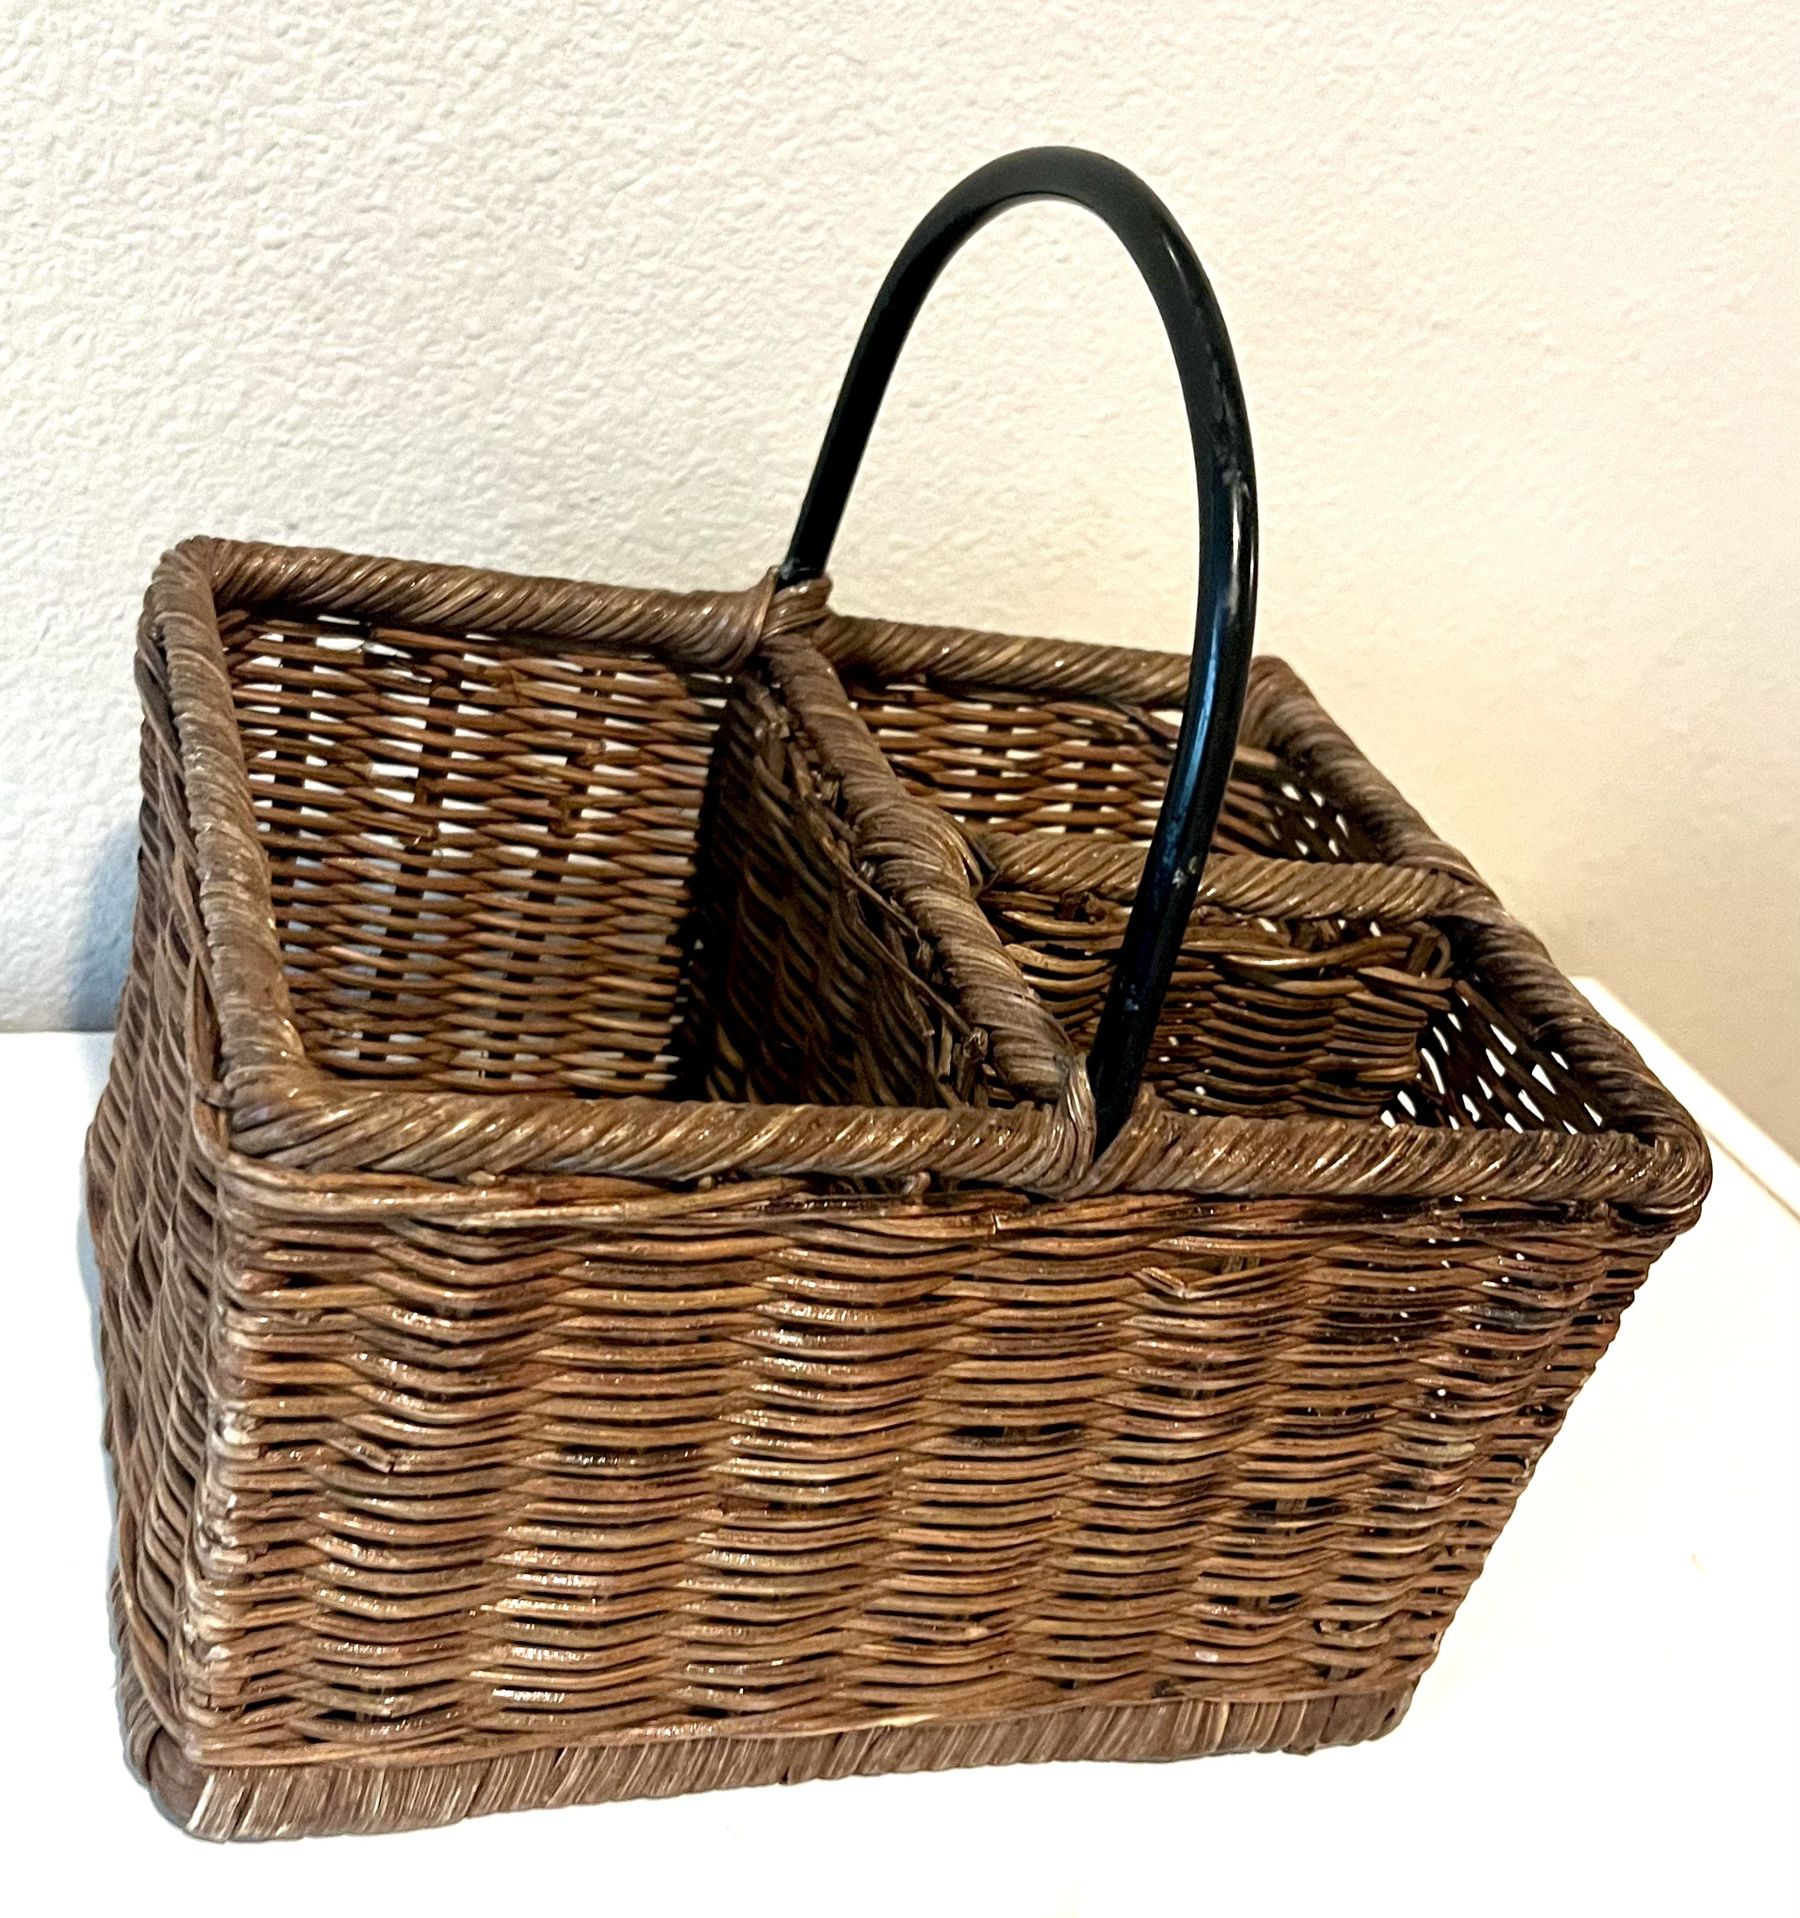 Sectioned Woven Wicker with Black Rod Handle